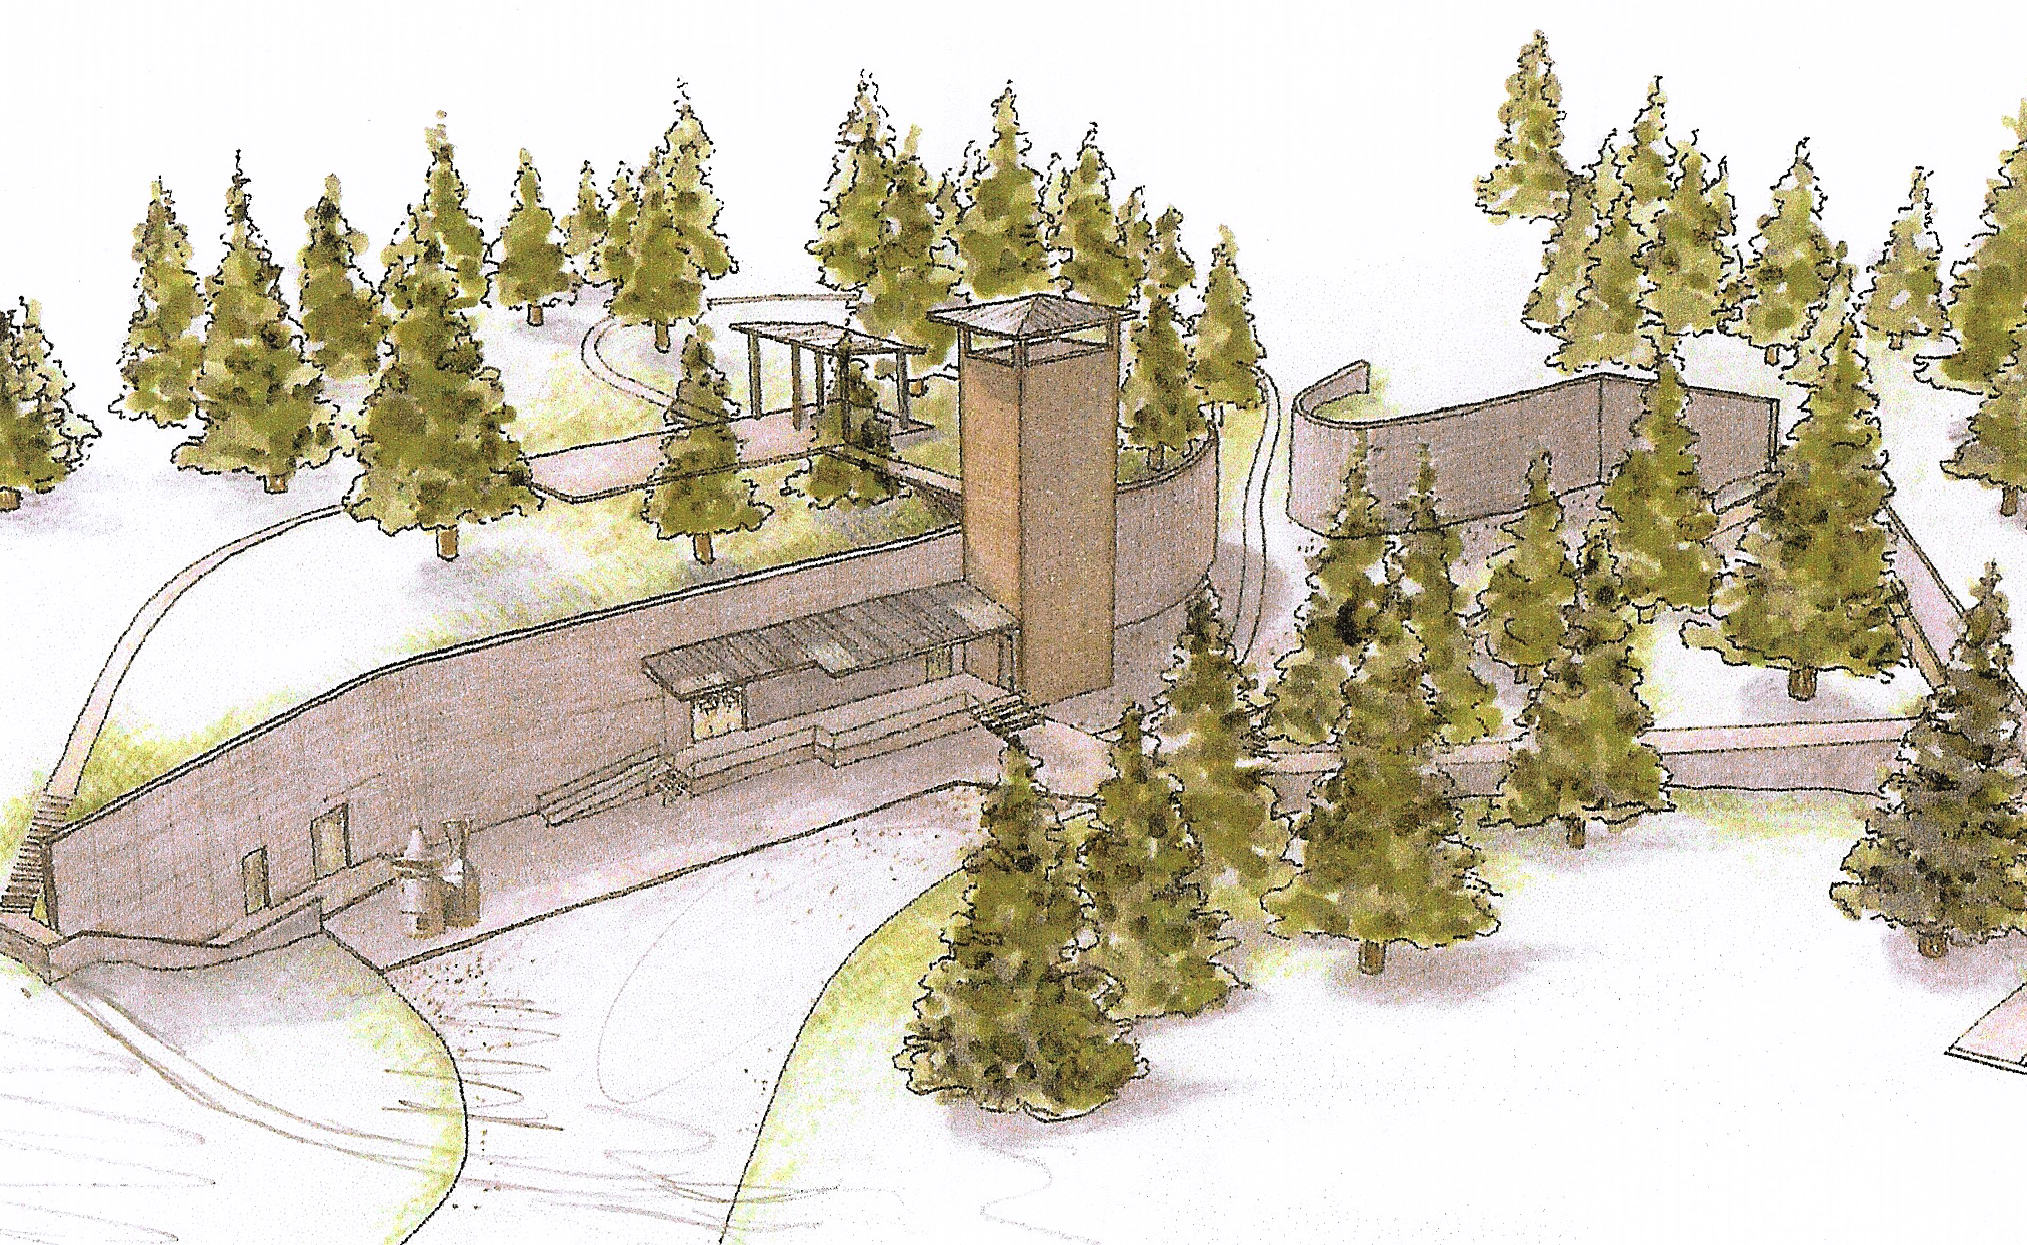 A rendering of the proposed restored Gun Site at Los Alamos